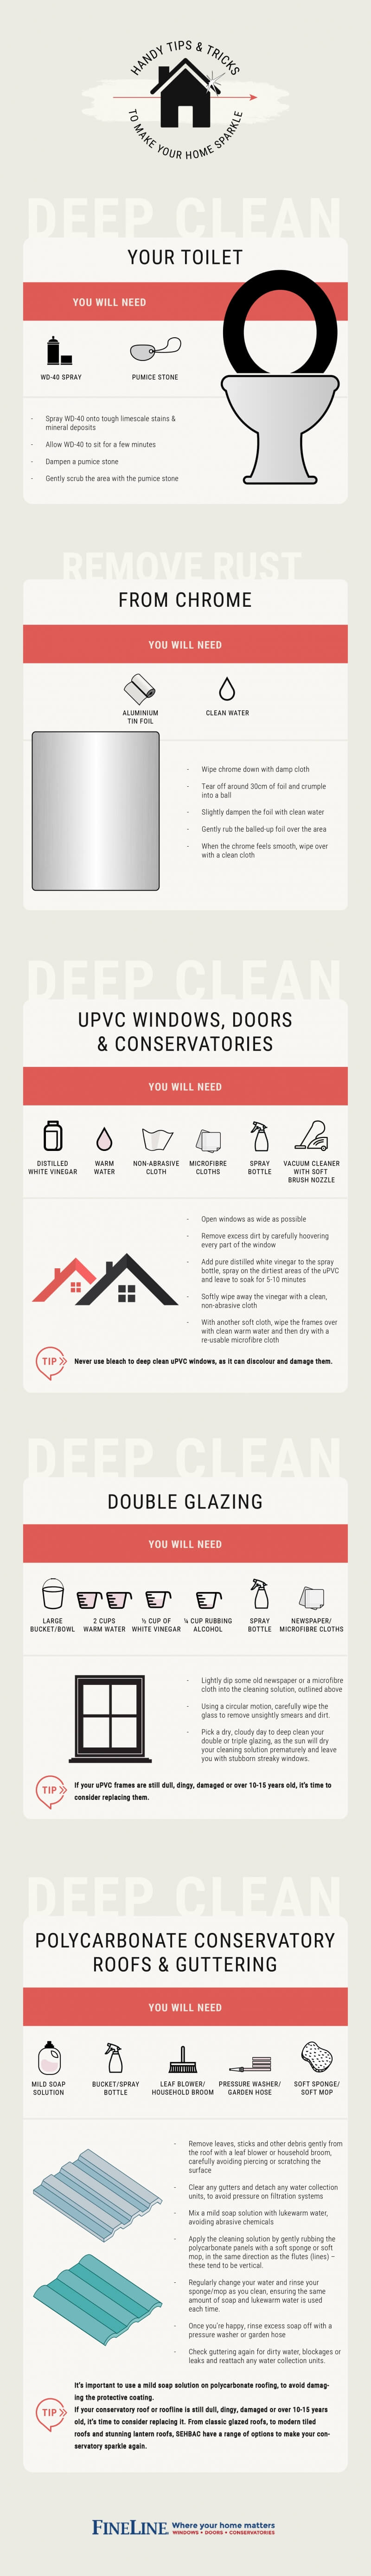 Deep cleaning home infographic.